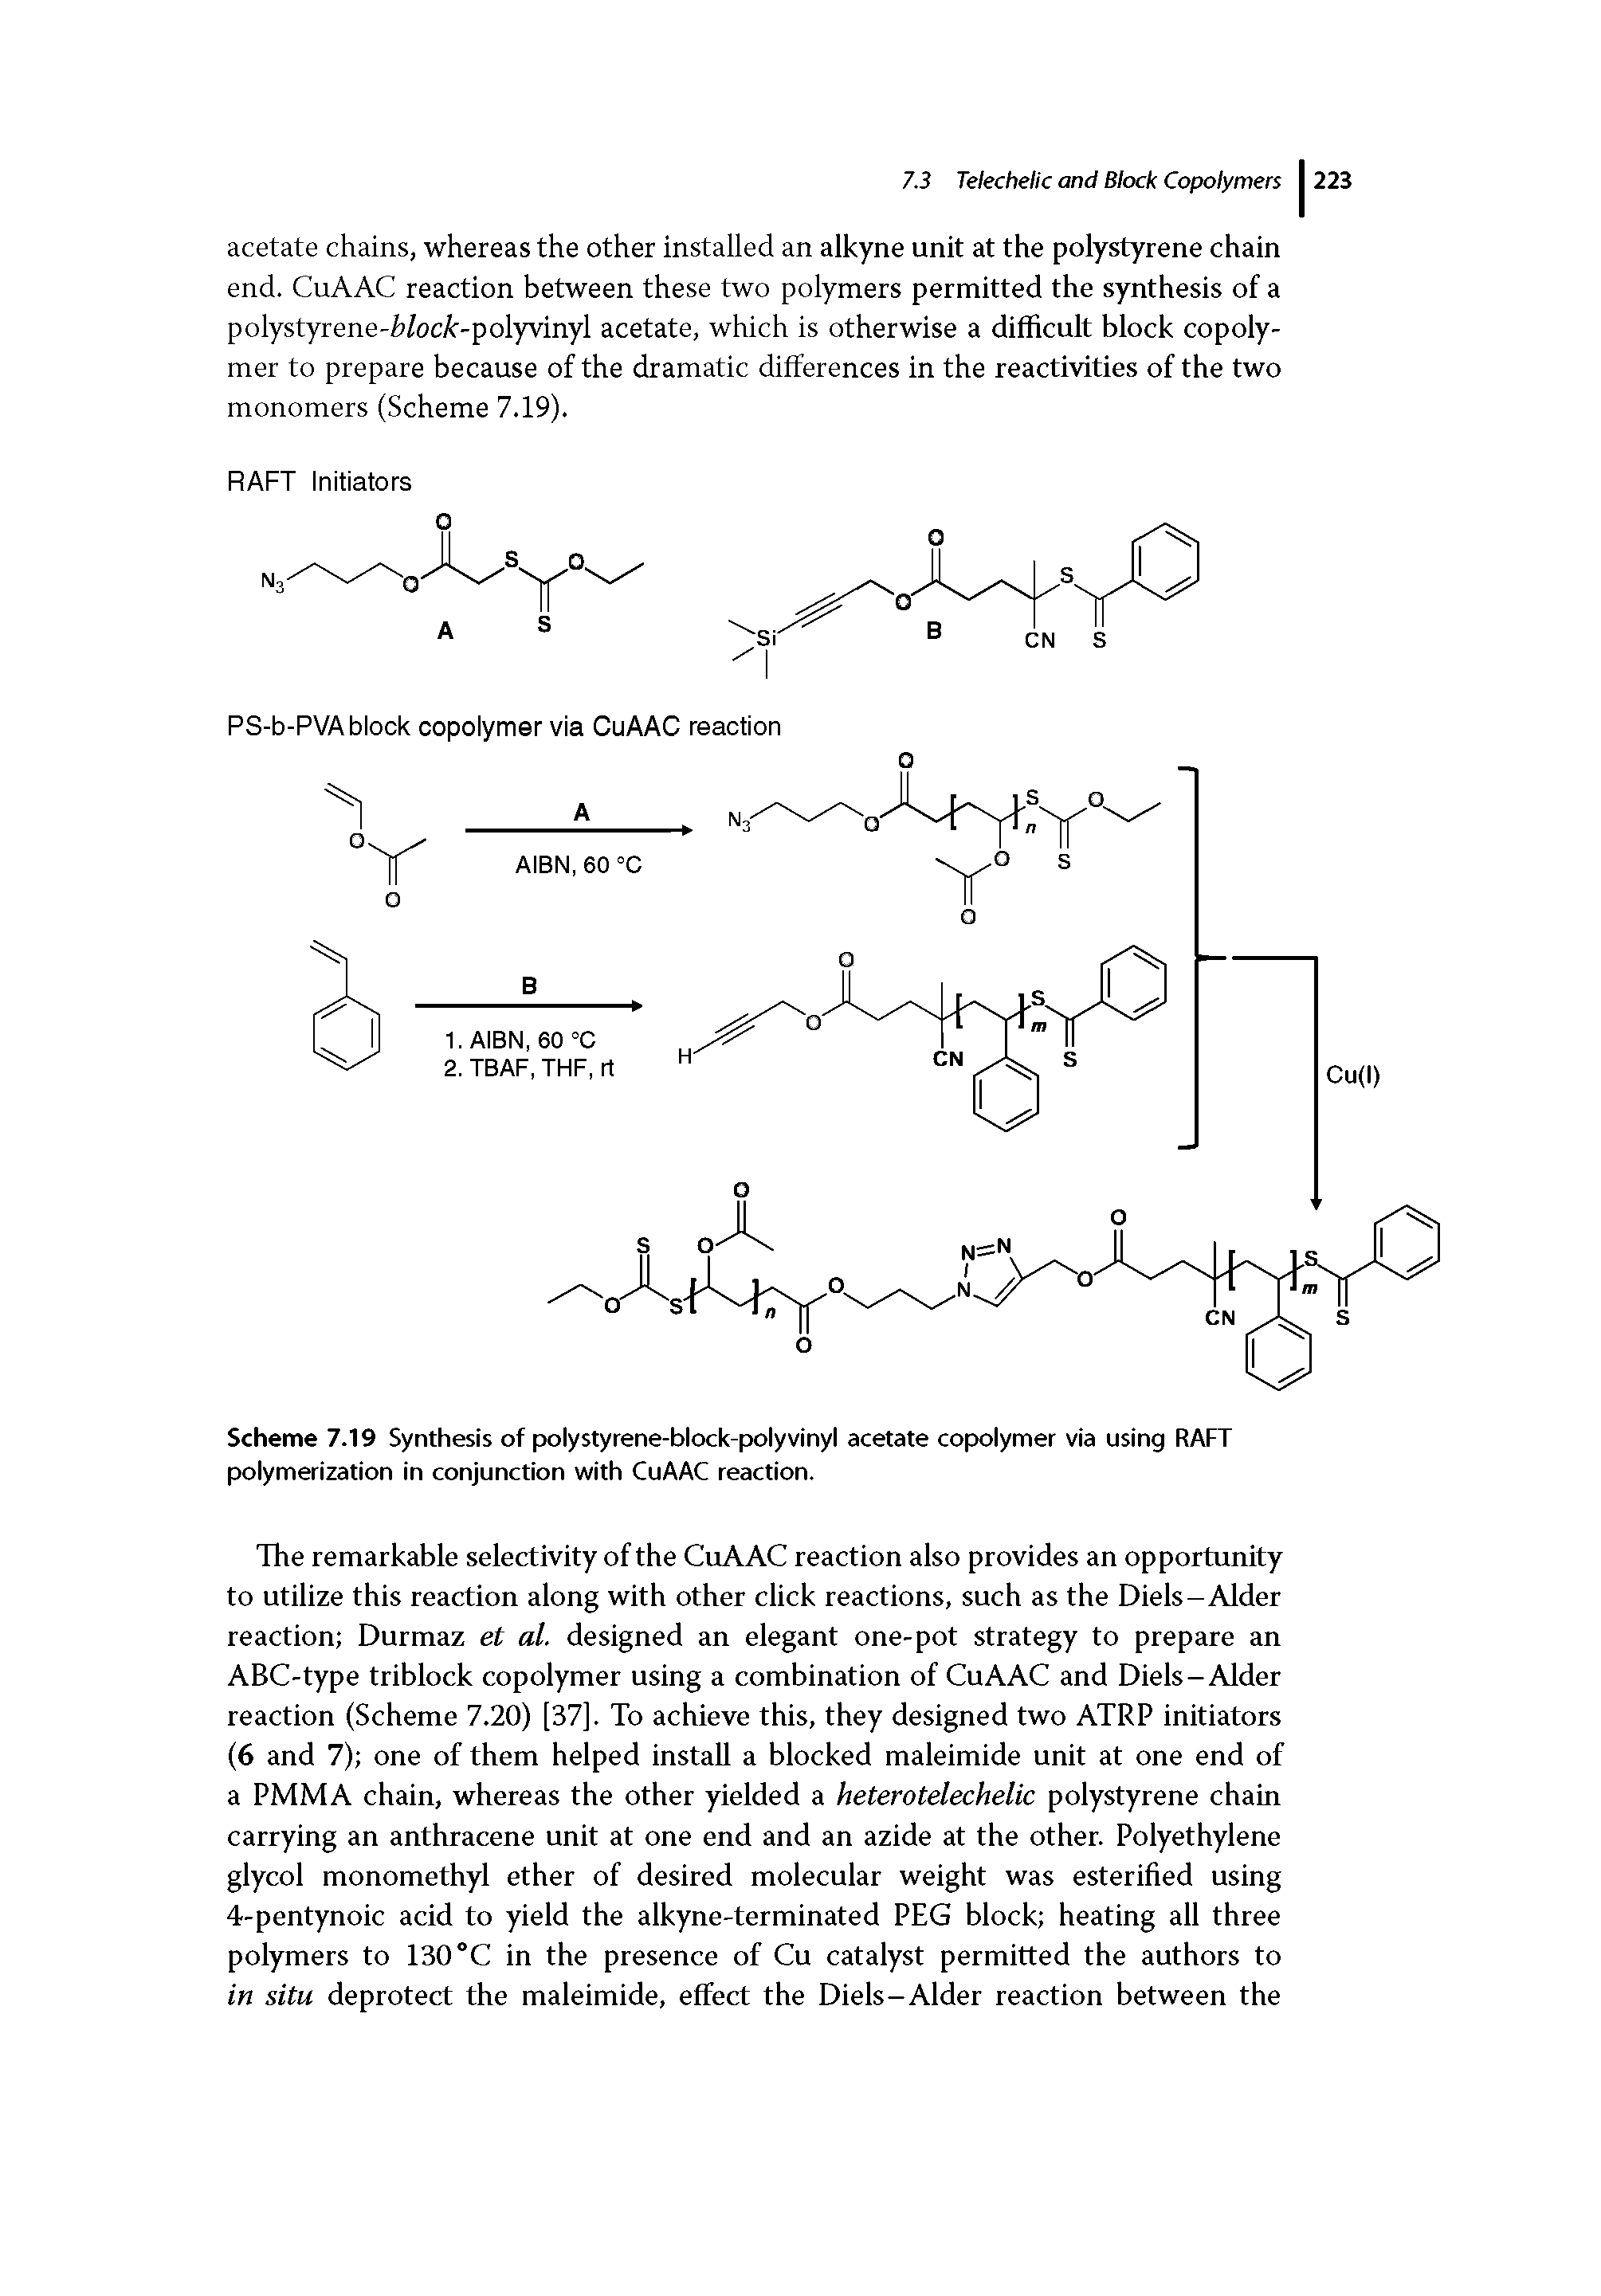 Scheme 7.19 Synthesis of polystyrene-block-polyvinyl acetate copolymer via using RAFT polymerization in conjunction with CuAAC reaction.